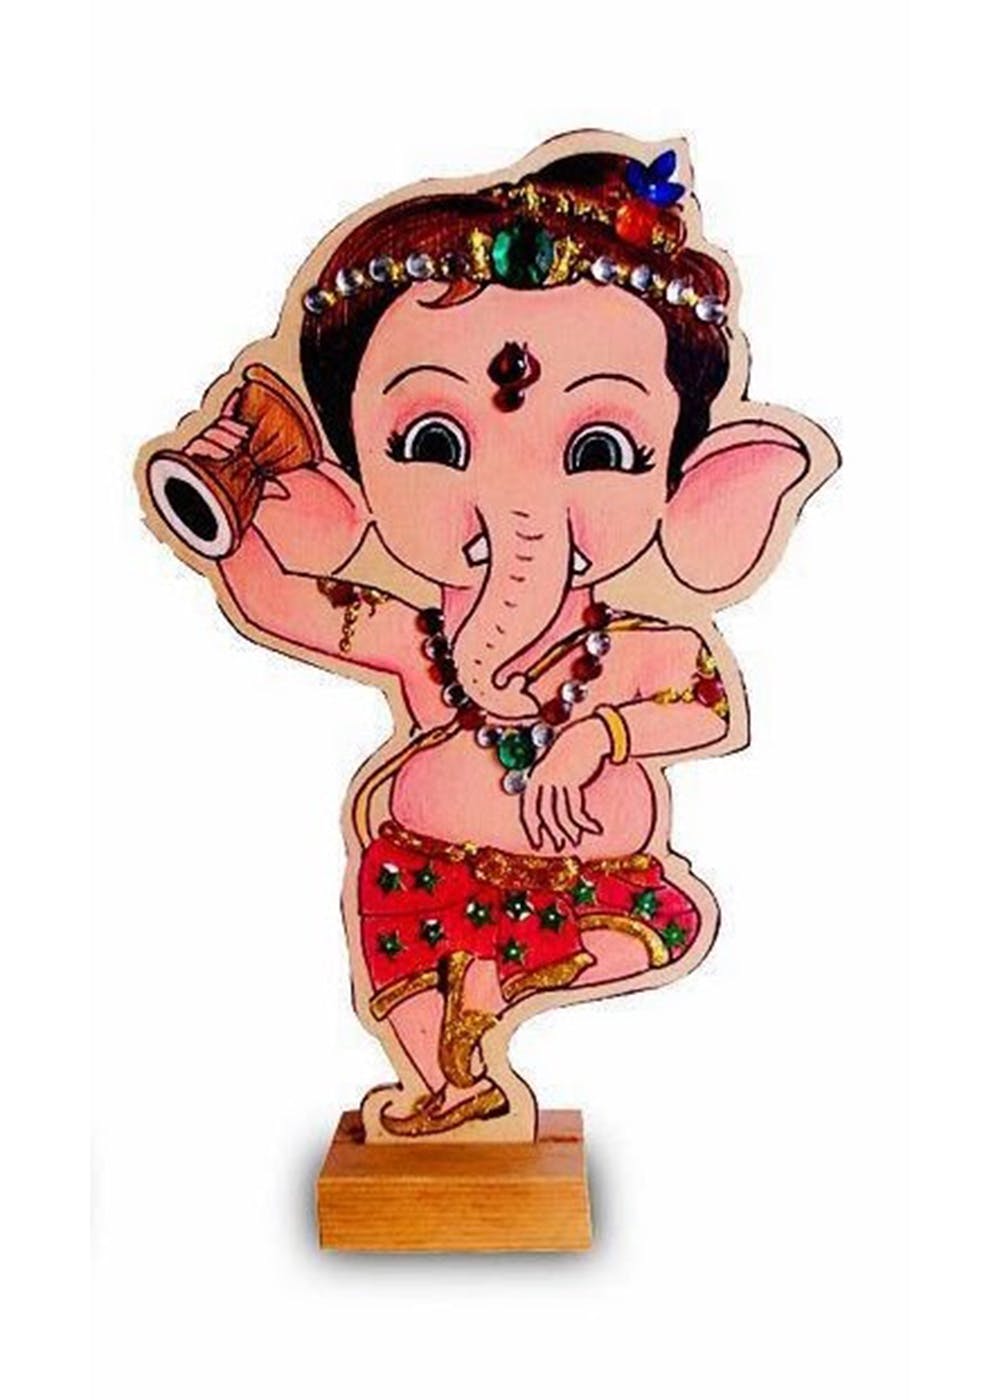 Cute Ganesha: Over 2,432 Royalty-Free Licensable Stock Illustrations &  Drawings | Shutterstock